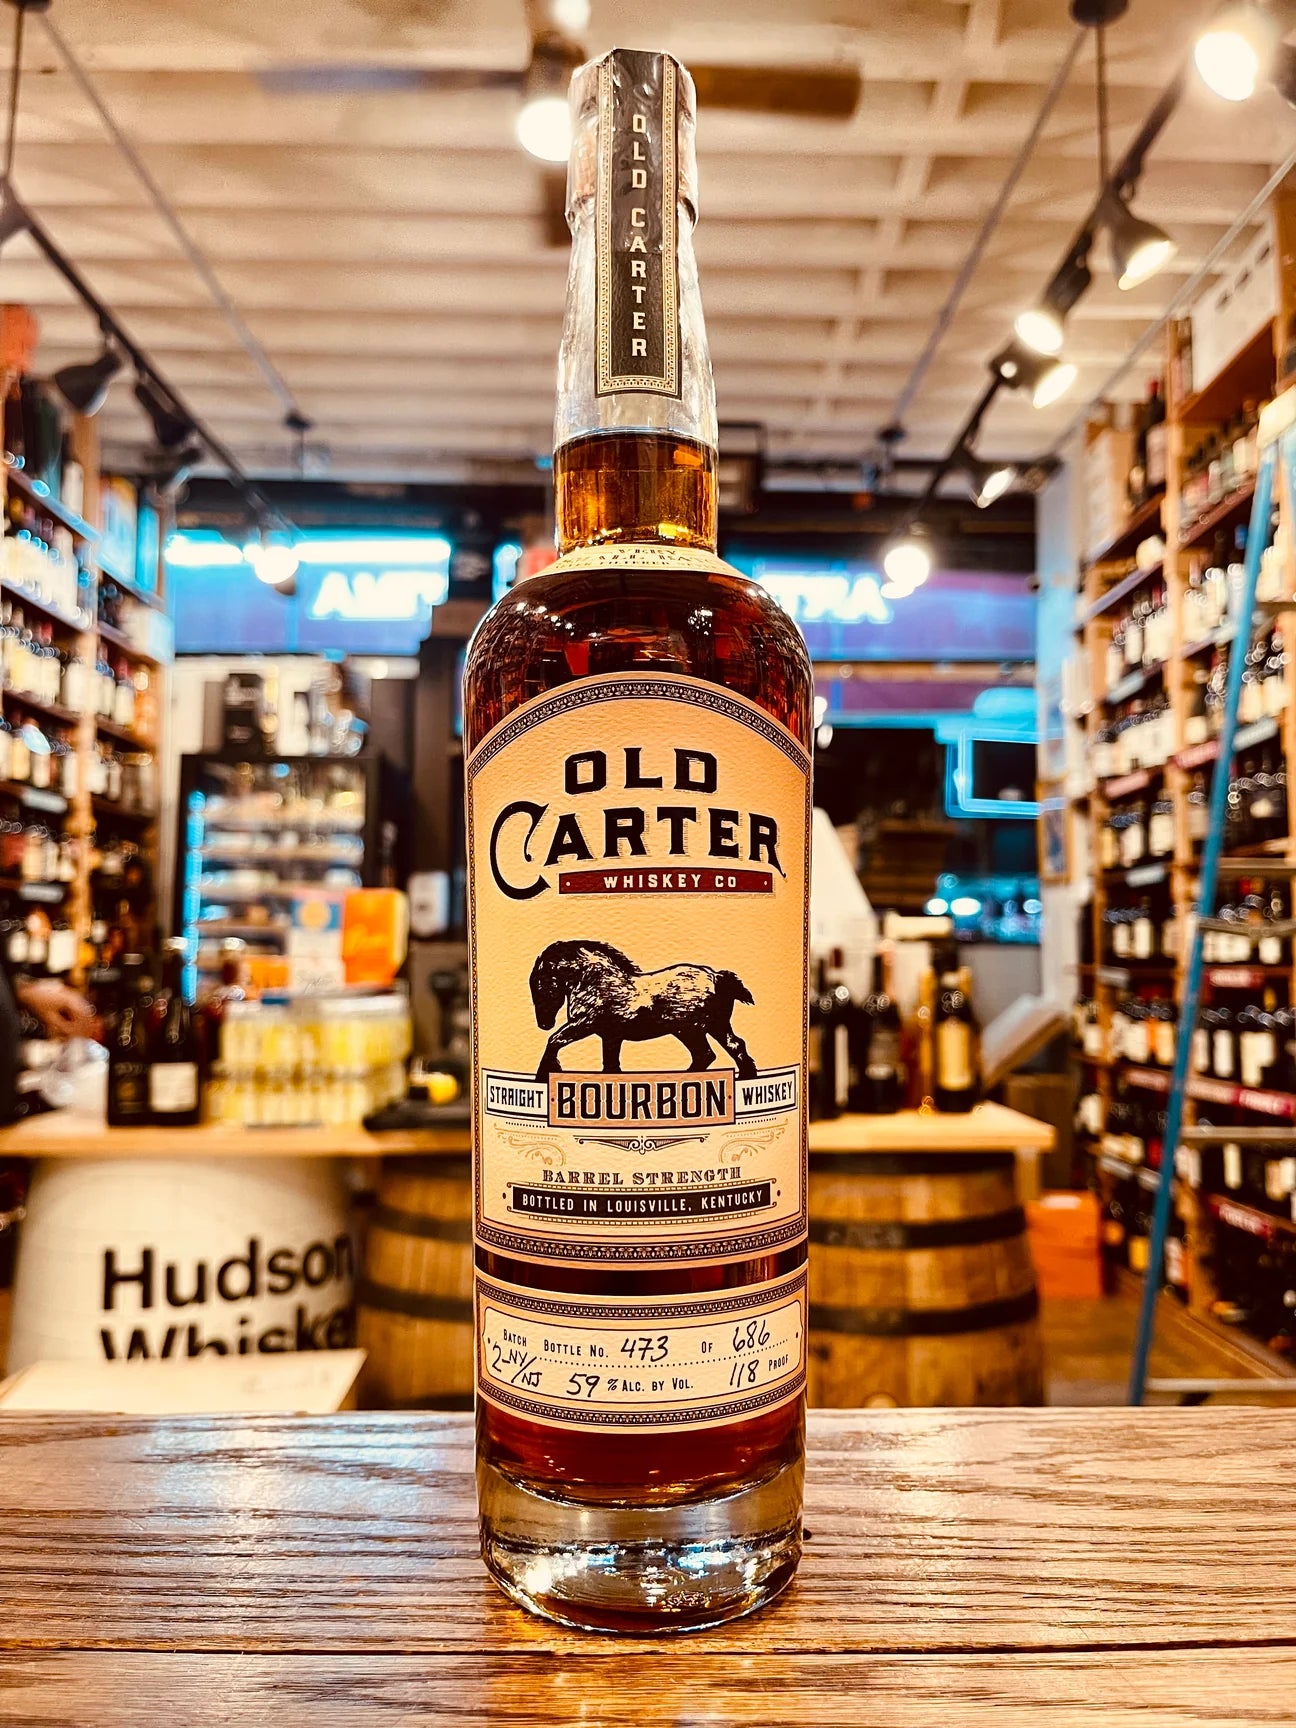 Old Carter Bourbon Whiskey Barrel Strength Very Small Batch 750mL Batch 3-NY/NJ a tall high shouldered slender necked clear glass bottle with a beige label and the image of a horse on it with a wooden topper